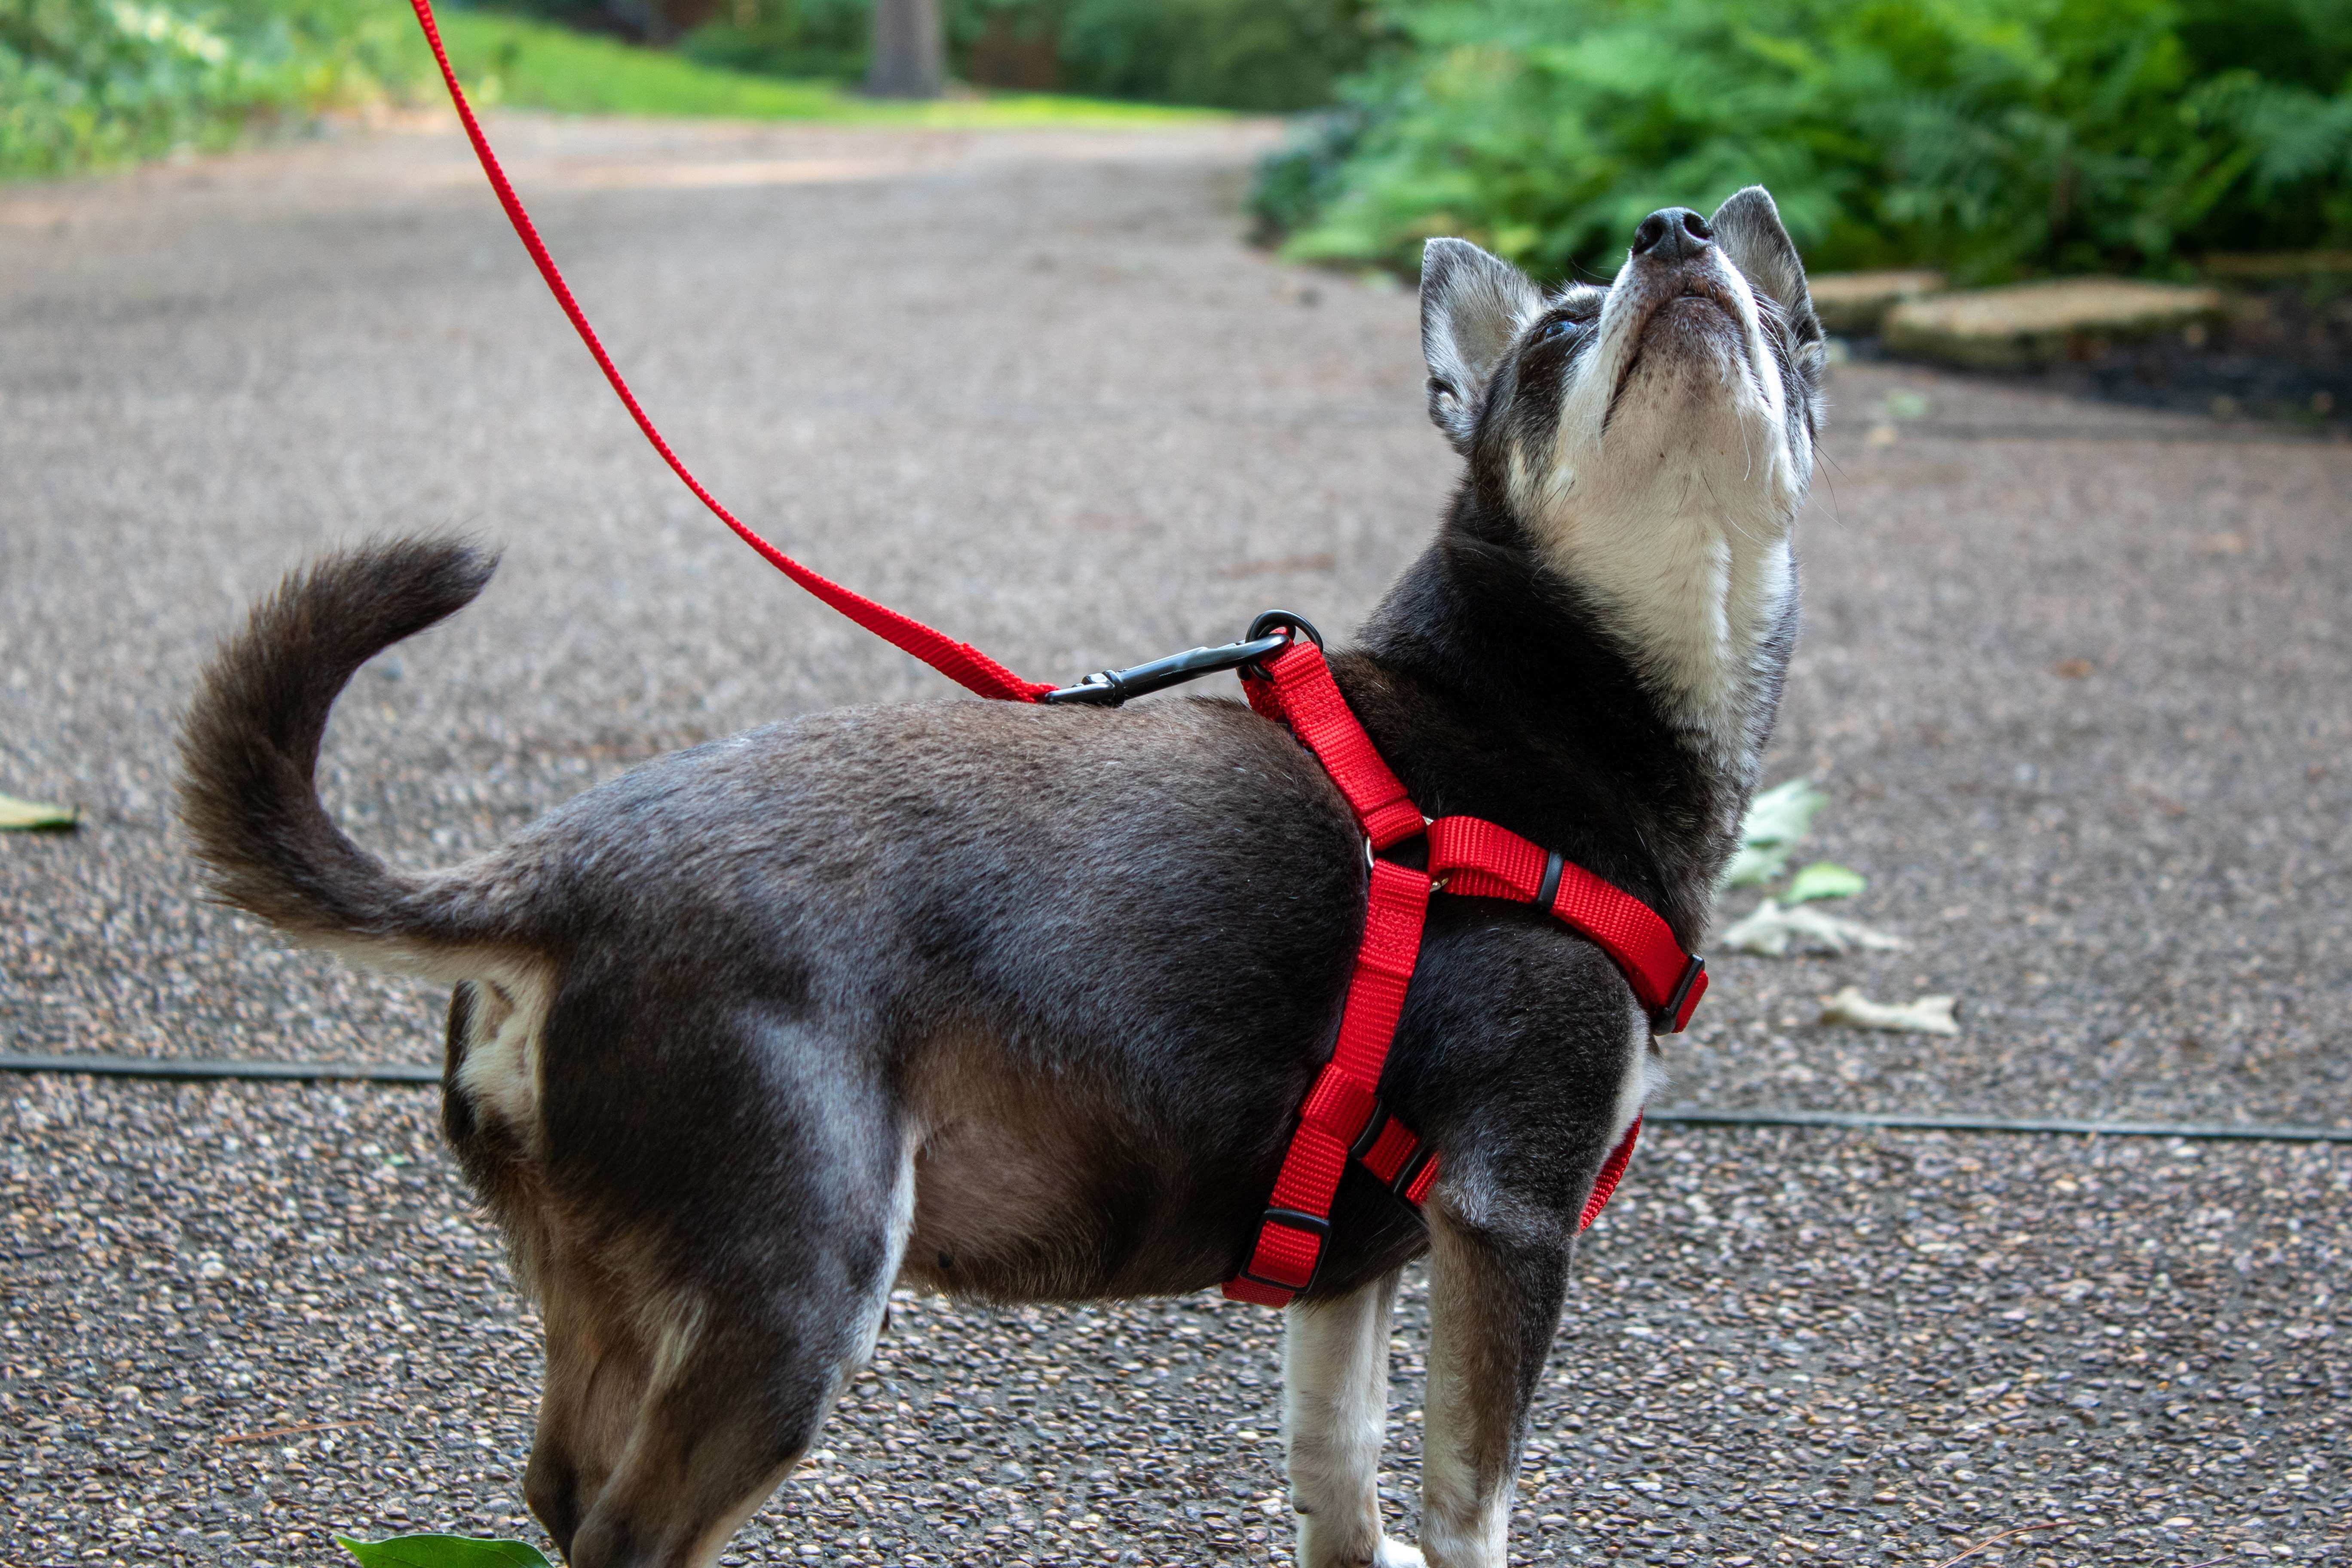 Hollywood Feed Ohio Made red leash on dog with harness